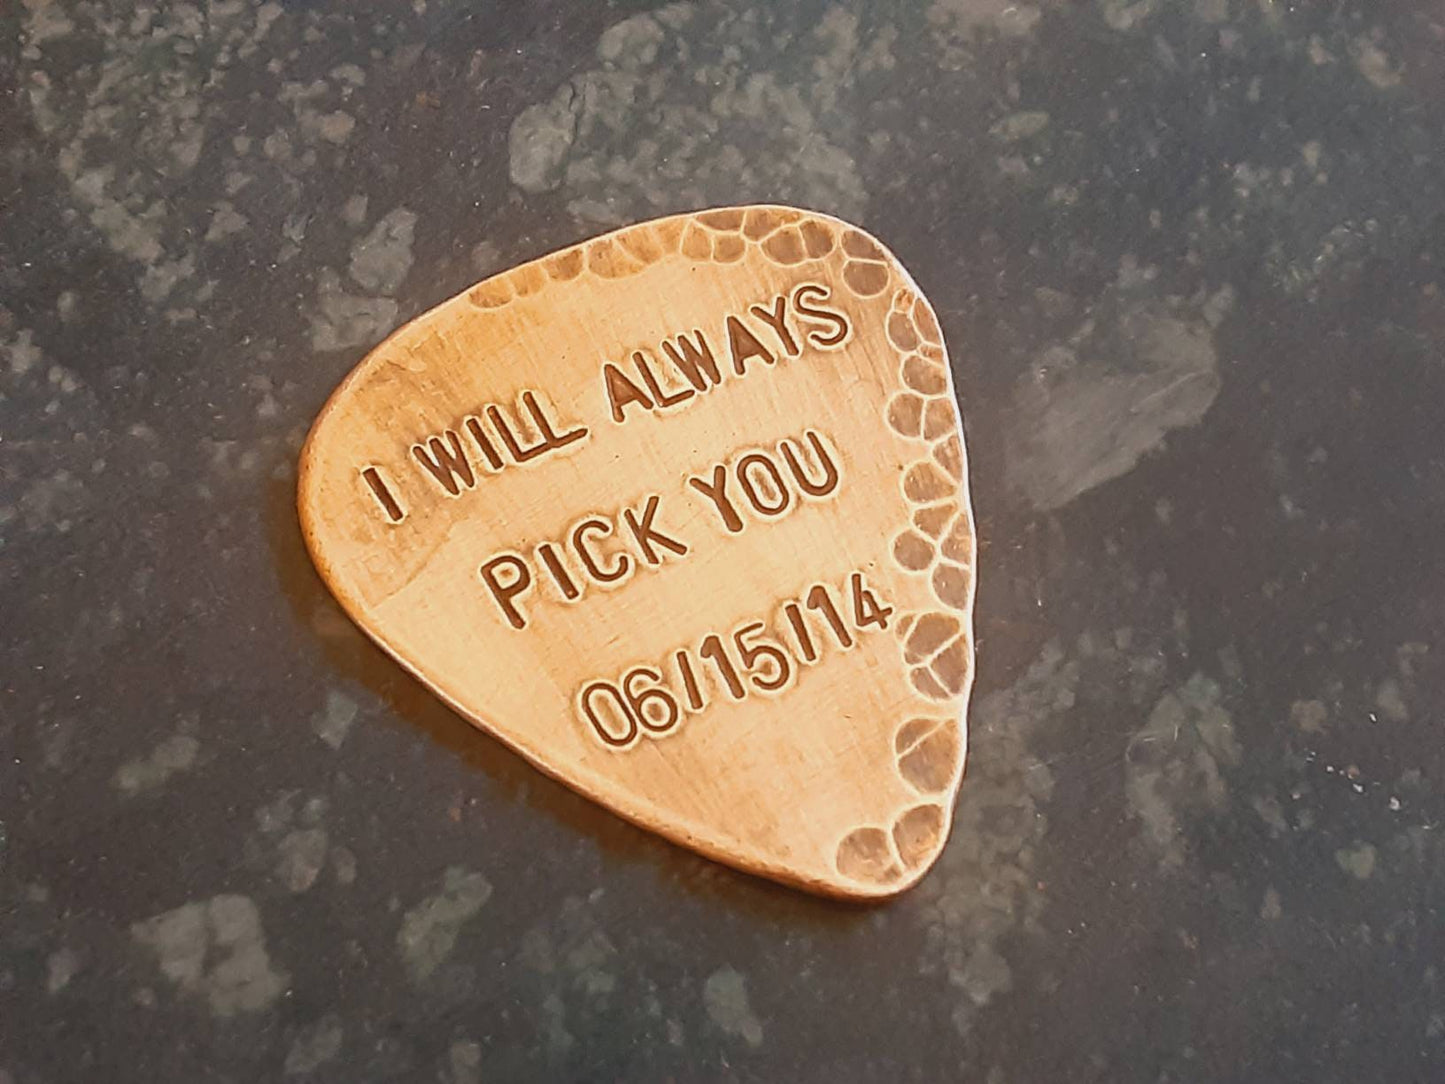 Playable bronze guitar pick - perfect for 8th or 19th bronze anniversary